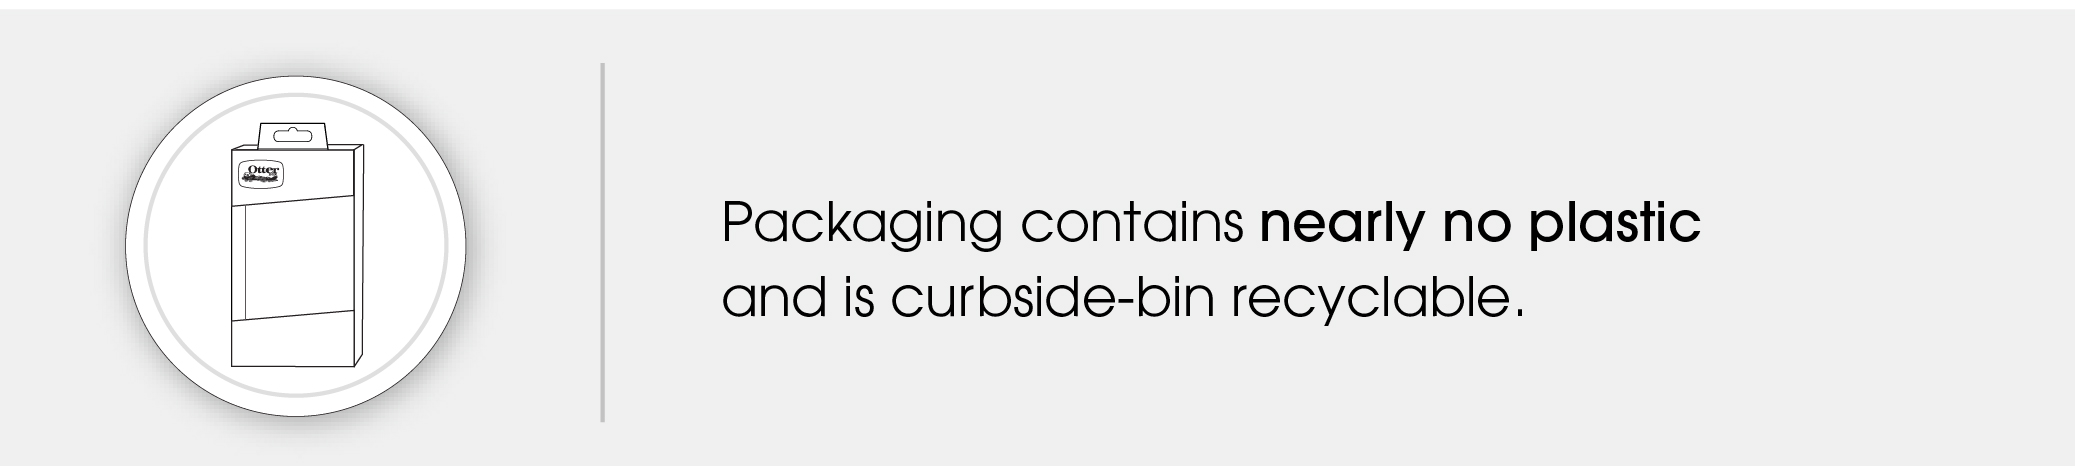 Package contains nearly no plastic and is curbside-bin recycable.